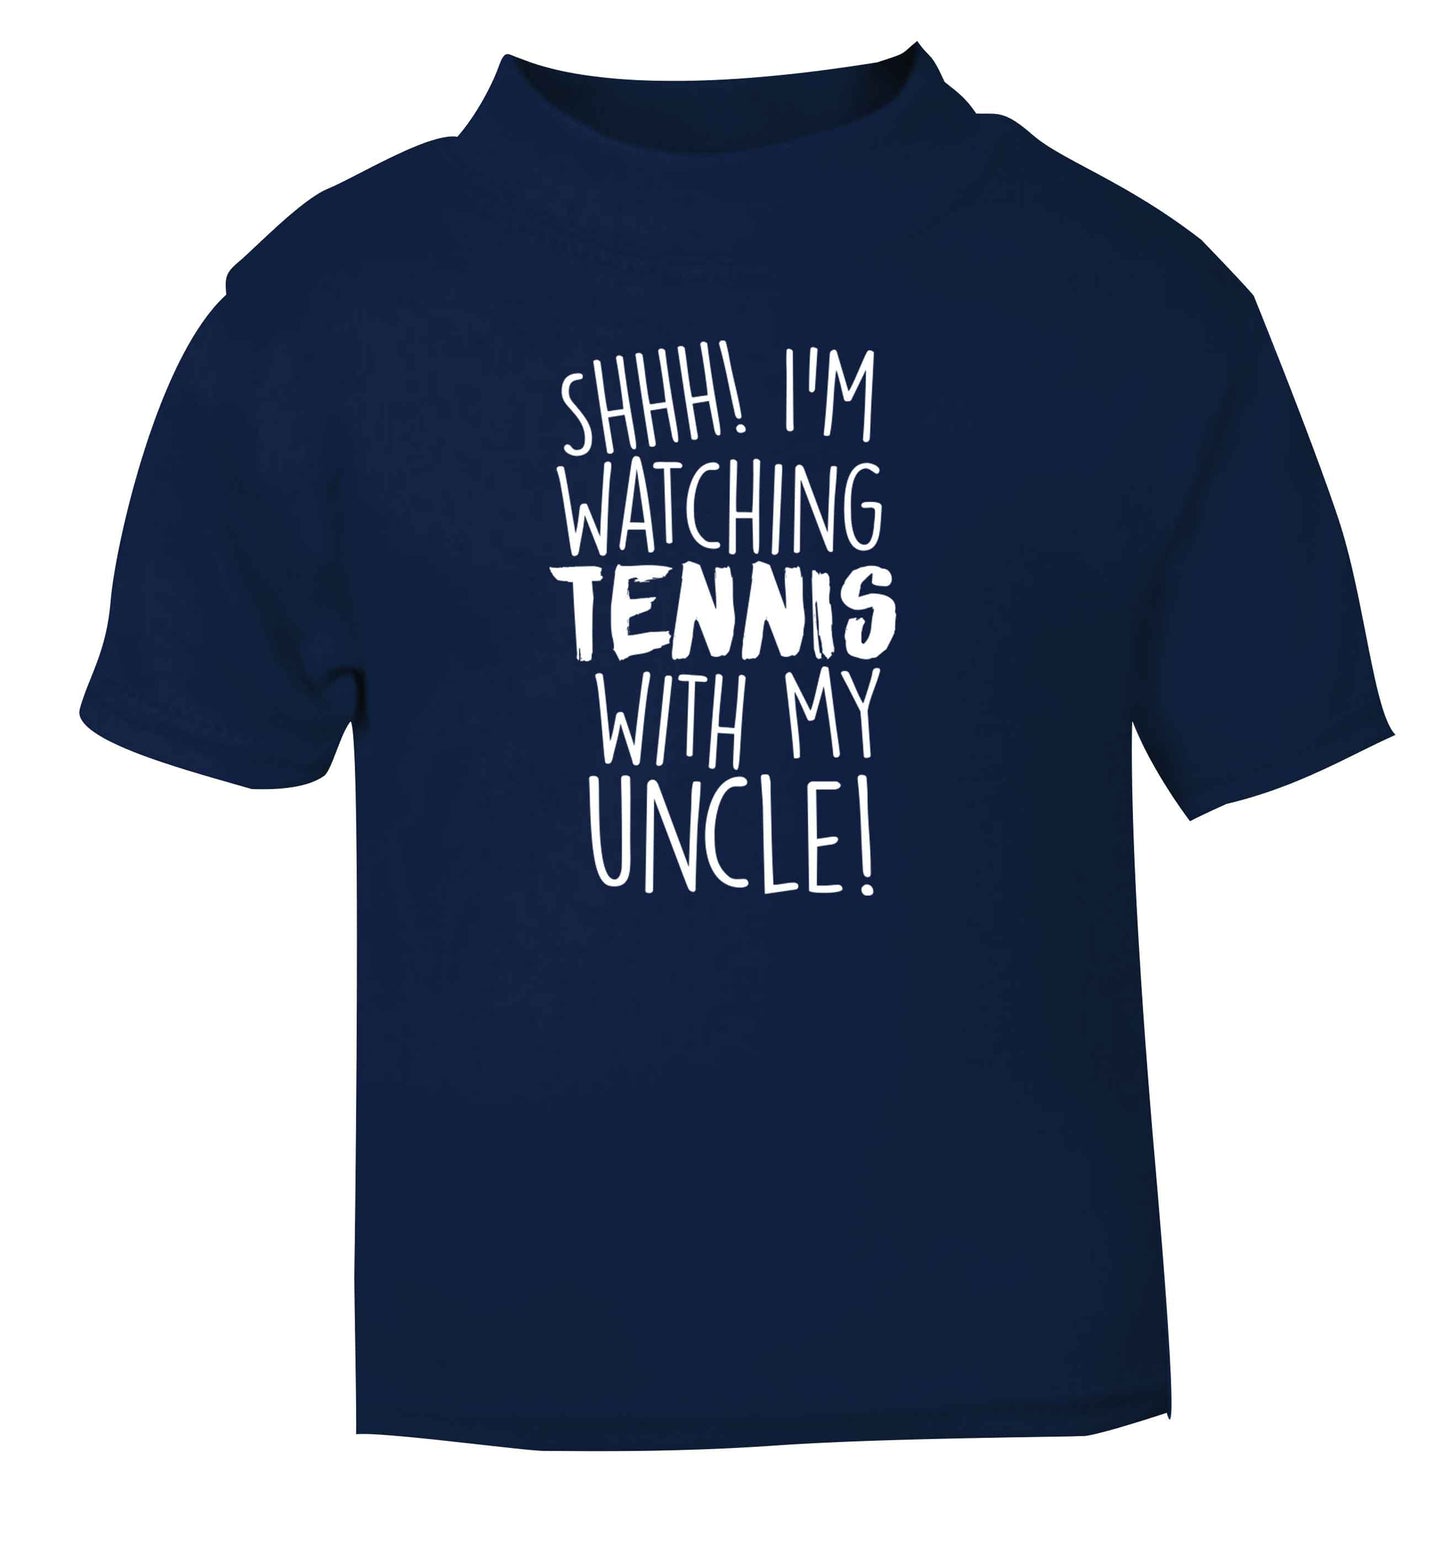 Shh! I'm watching tennis with my uncle! navy Baby Toddler Tshirt 2 Years